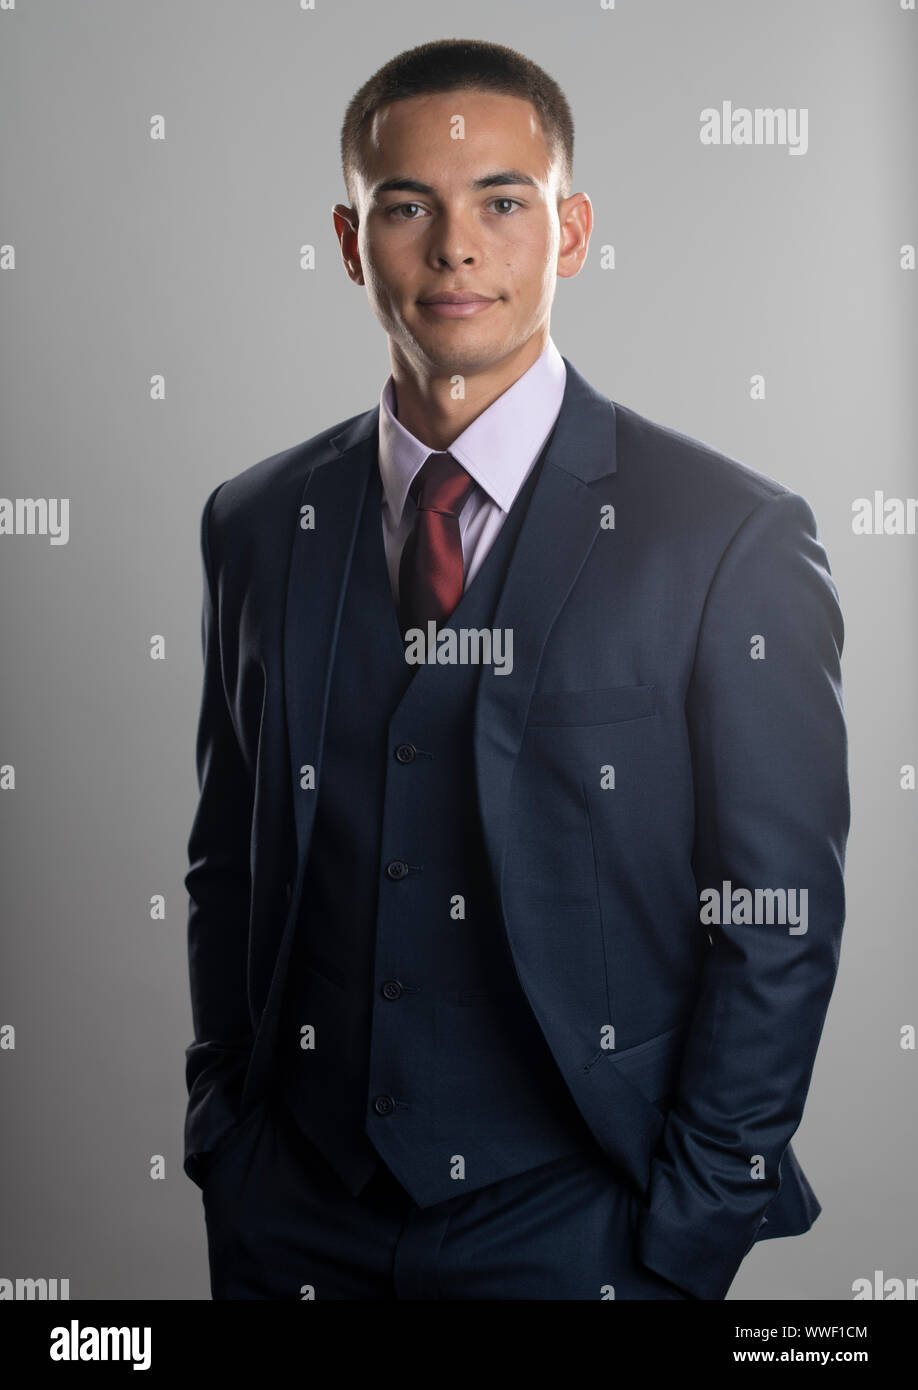 Handsome mixed race young man wearing business suit Stock Photo